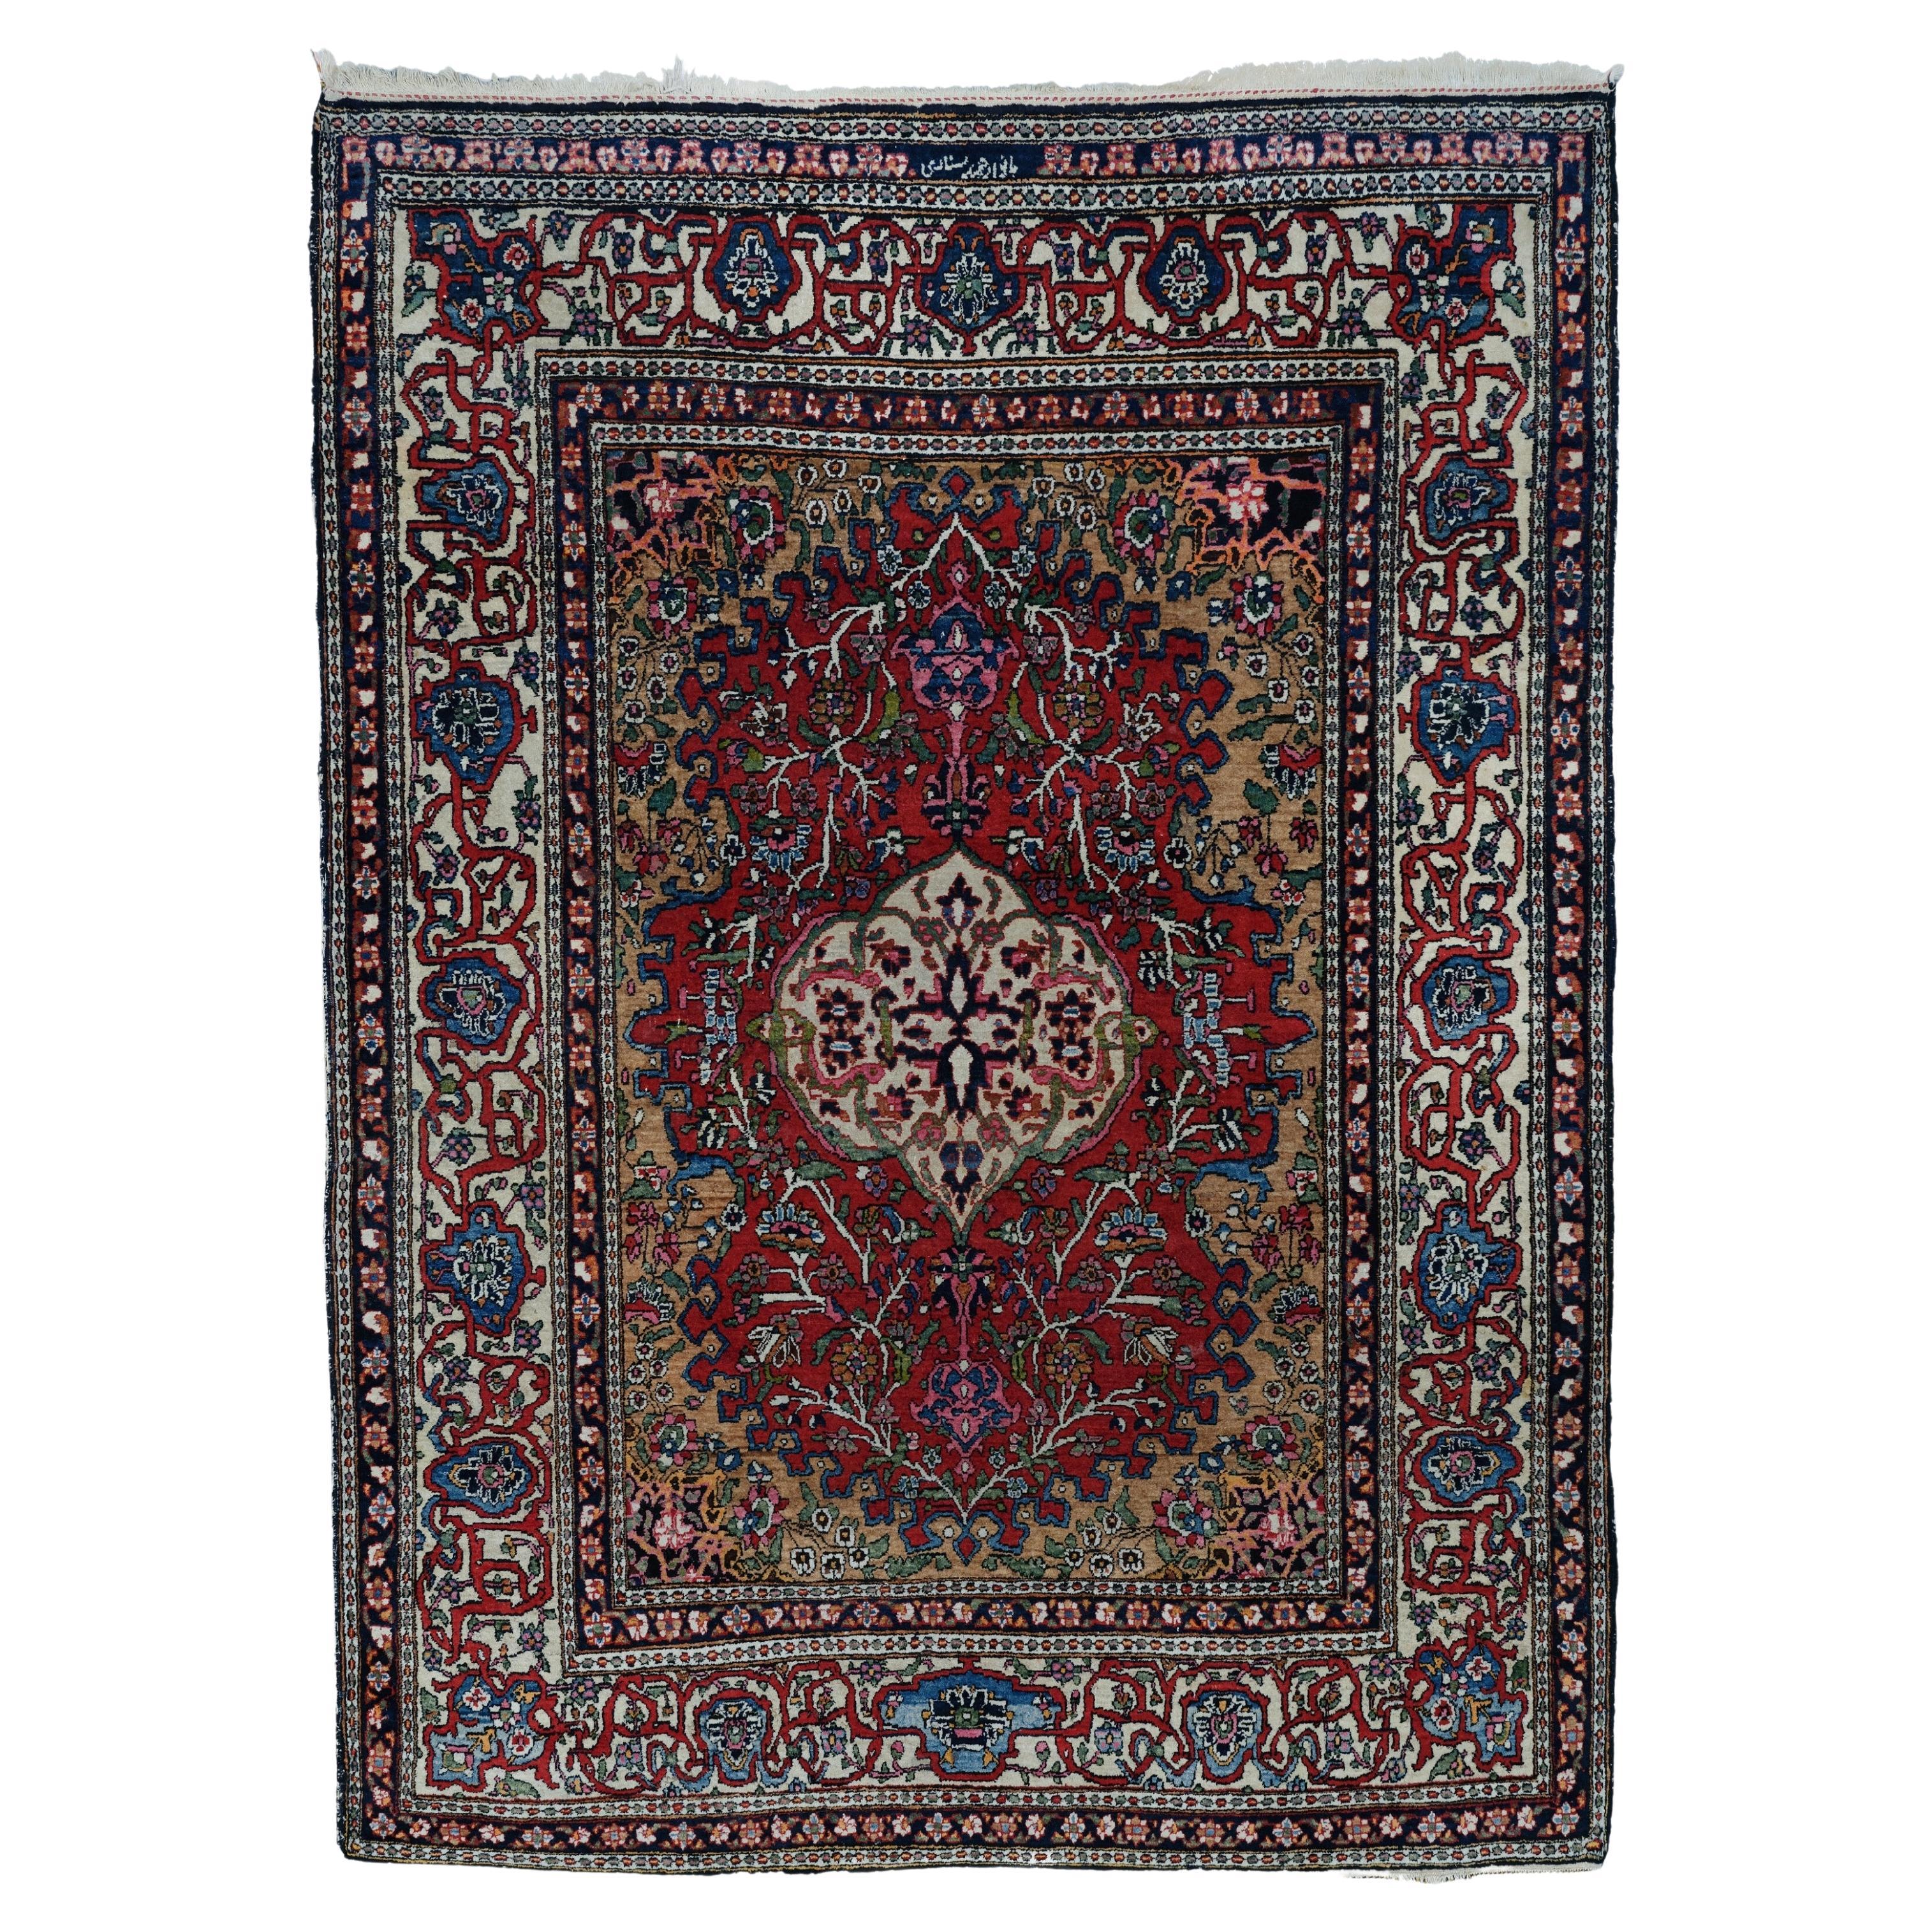 Antique Isfahan Rug - 19th Century Isfahan Rug, Antique Rug, Handwoven Rug For Sale